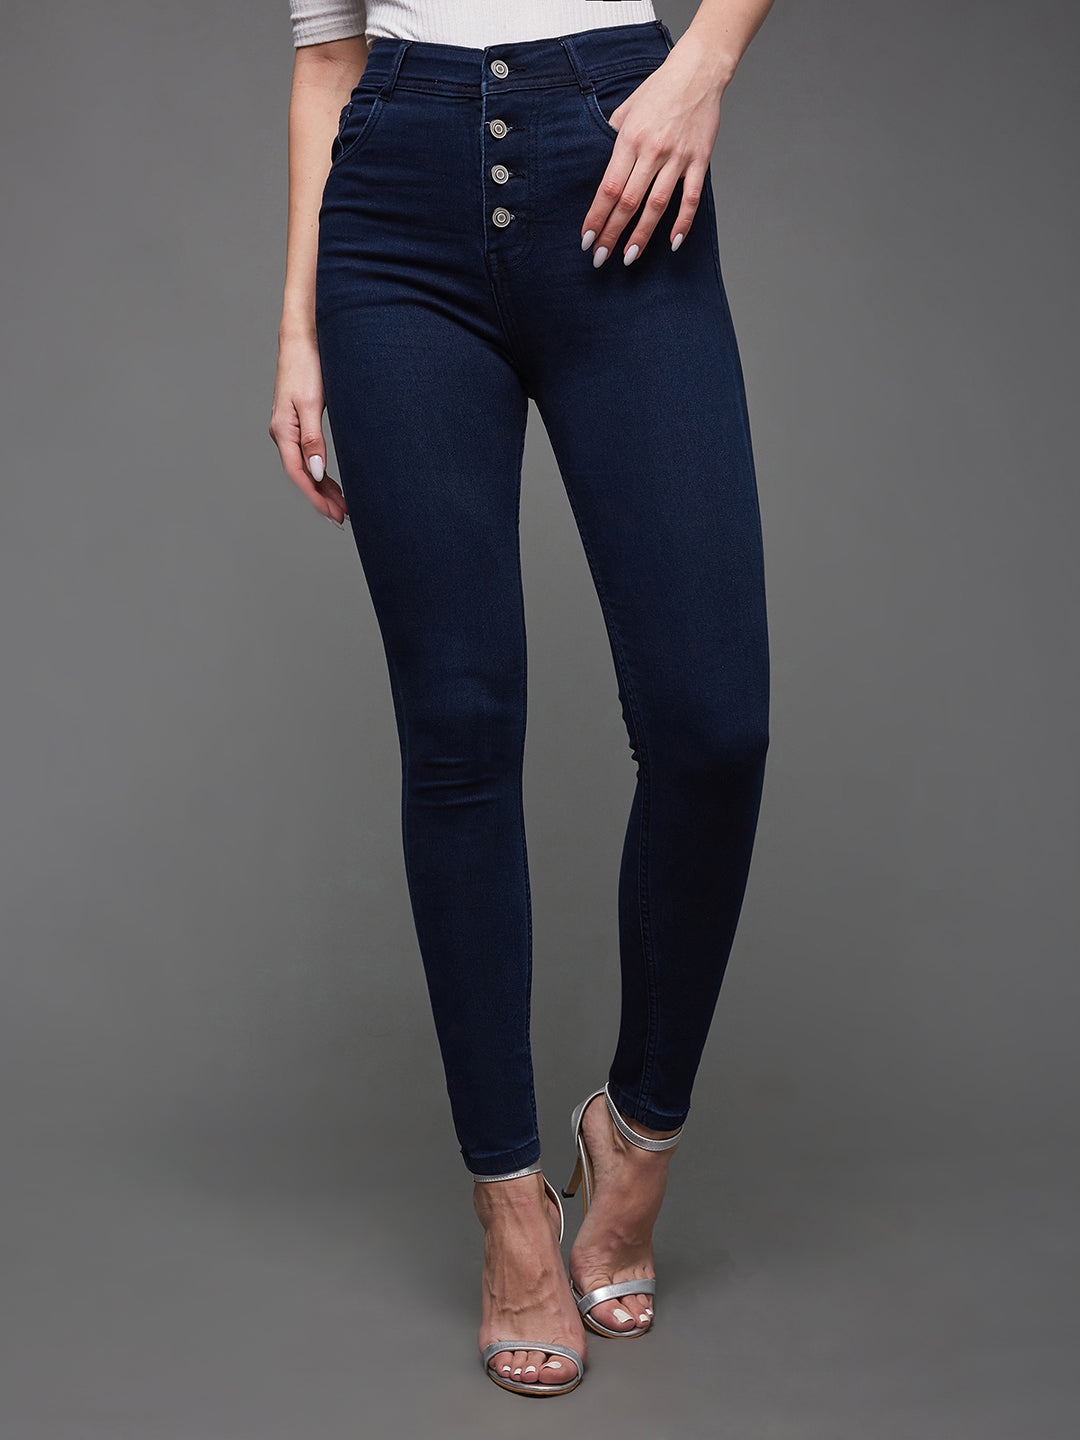 MISS CHASE | Navy Blue Skinny Fit High Rise Regular Length Clean Look Stretchable Denim Jeans